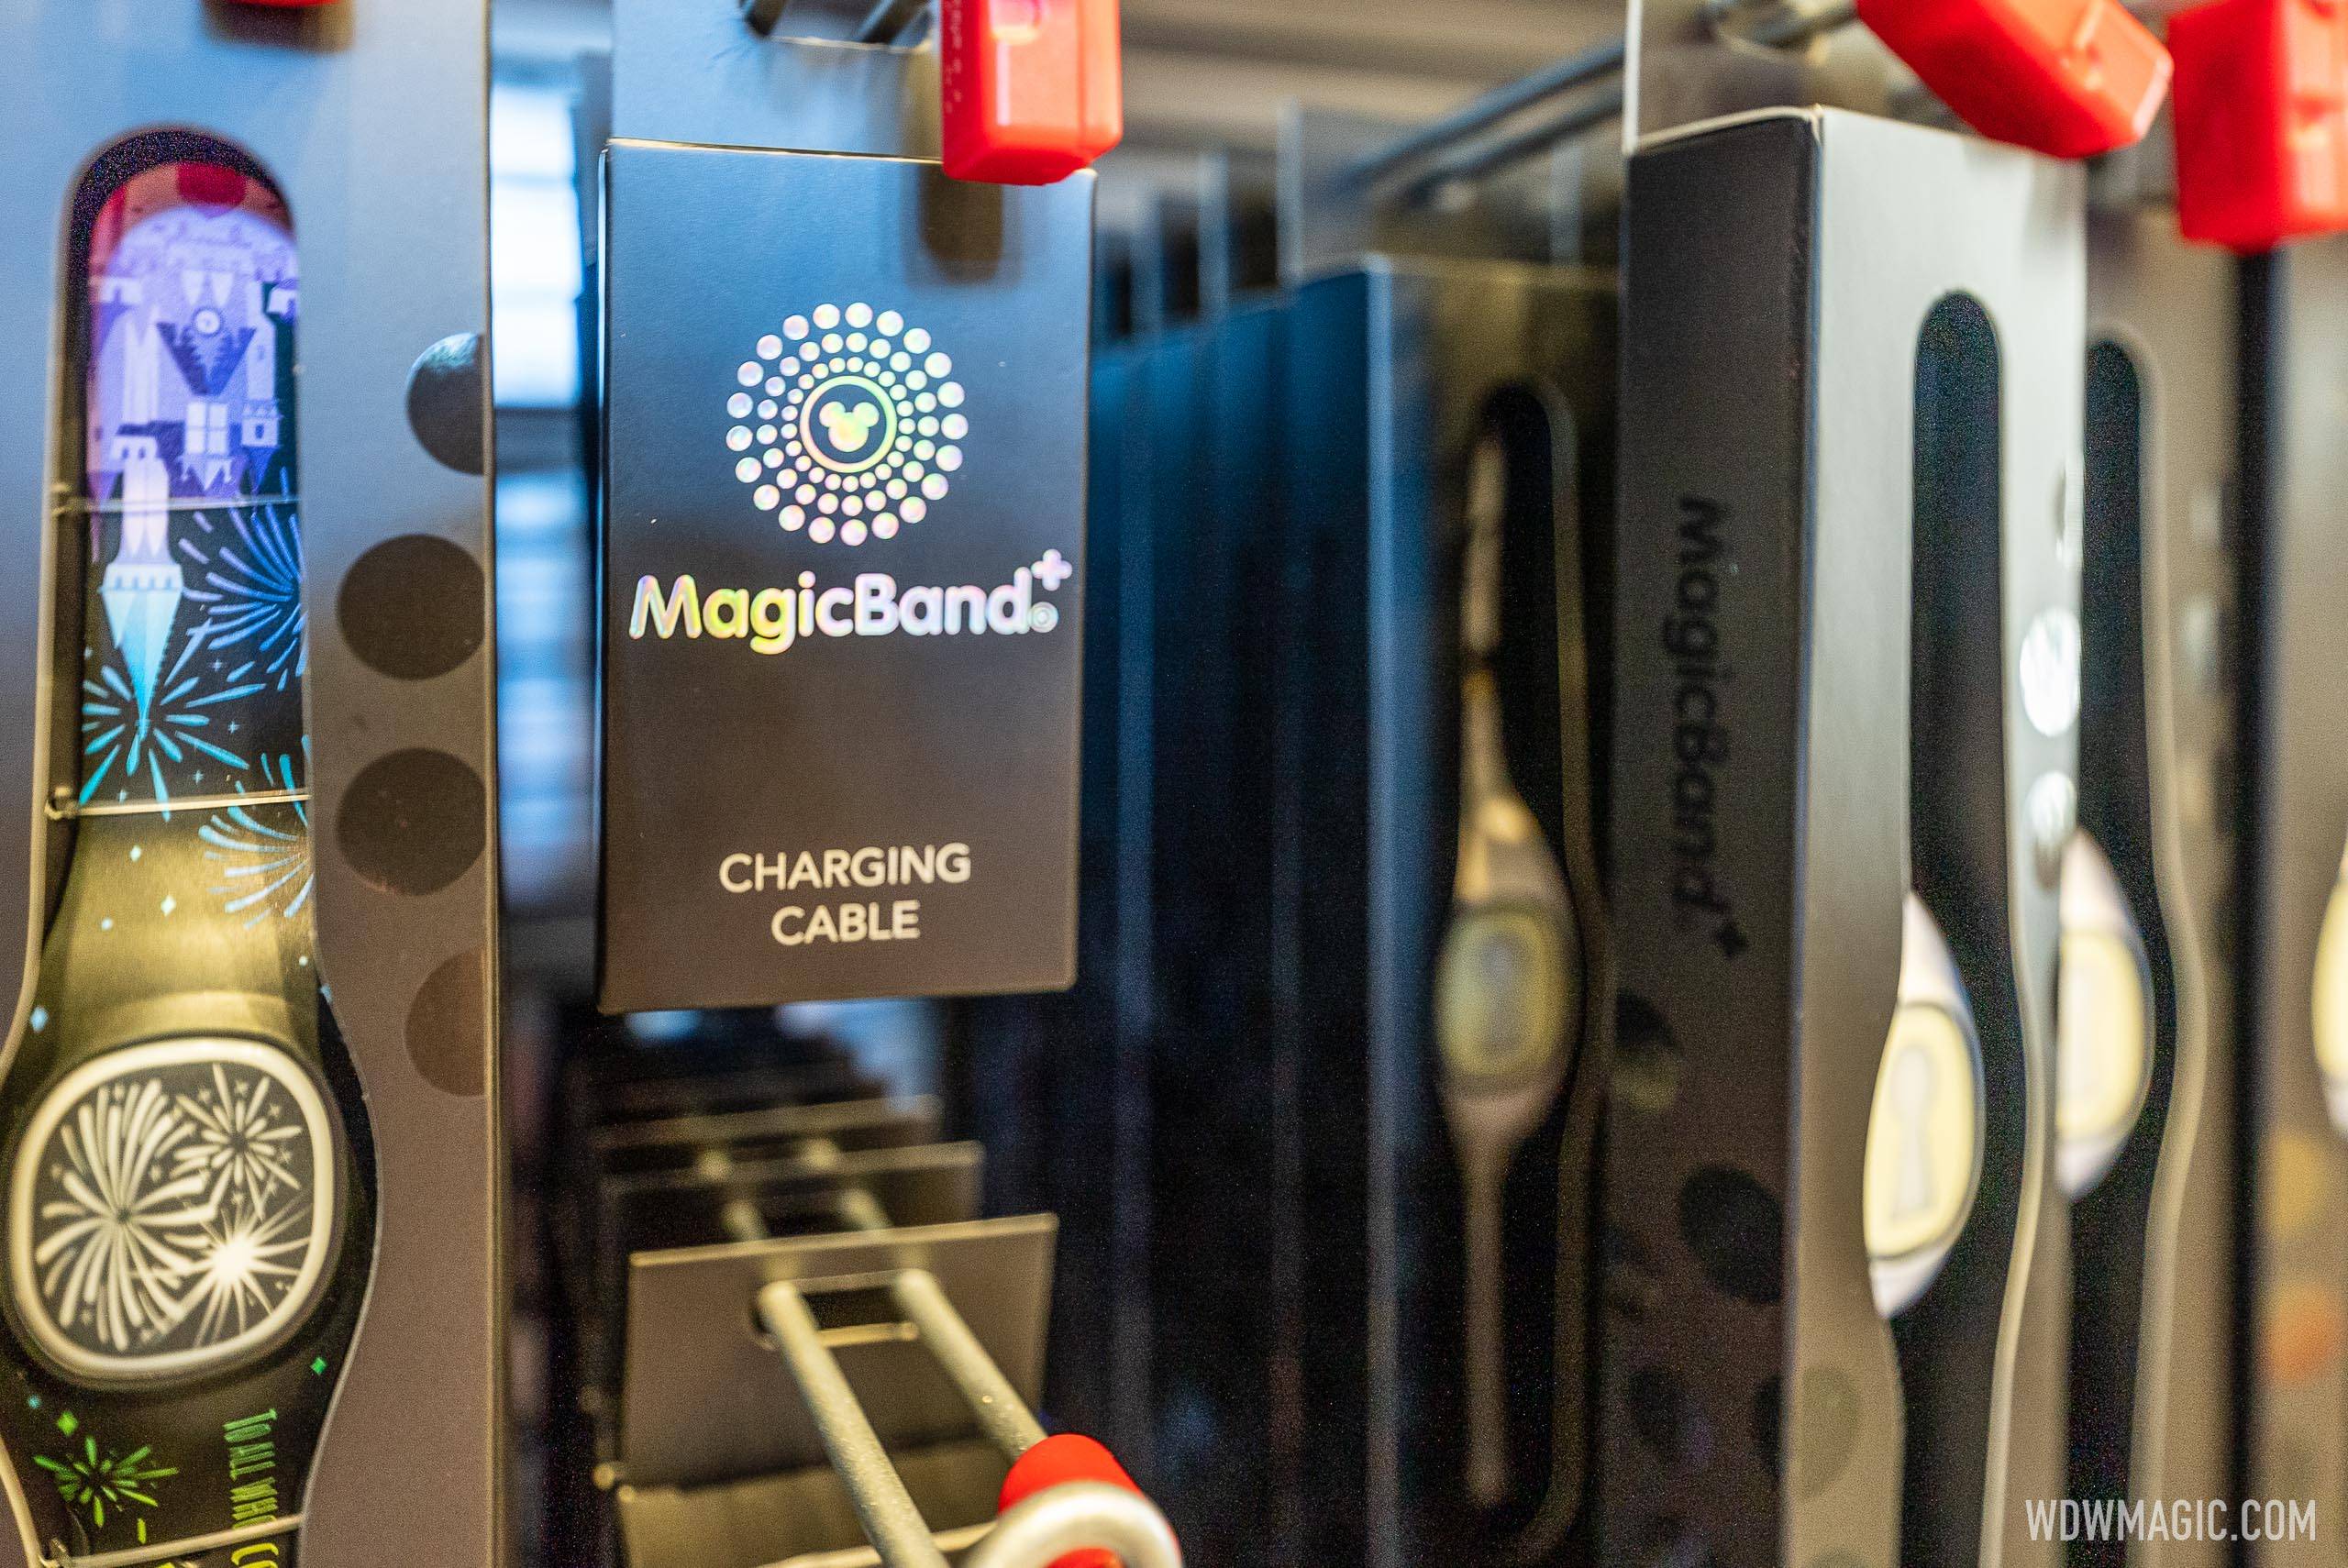 MagicBand+ Charging Cable accessory